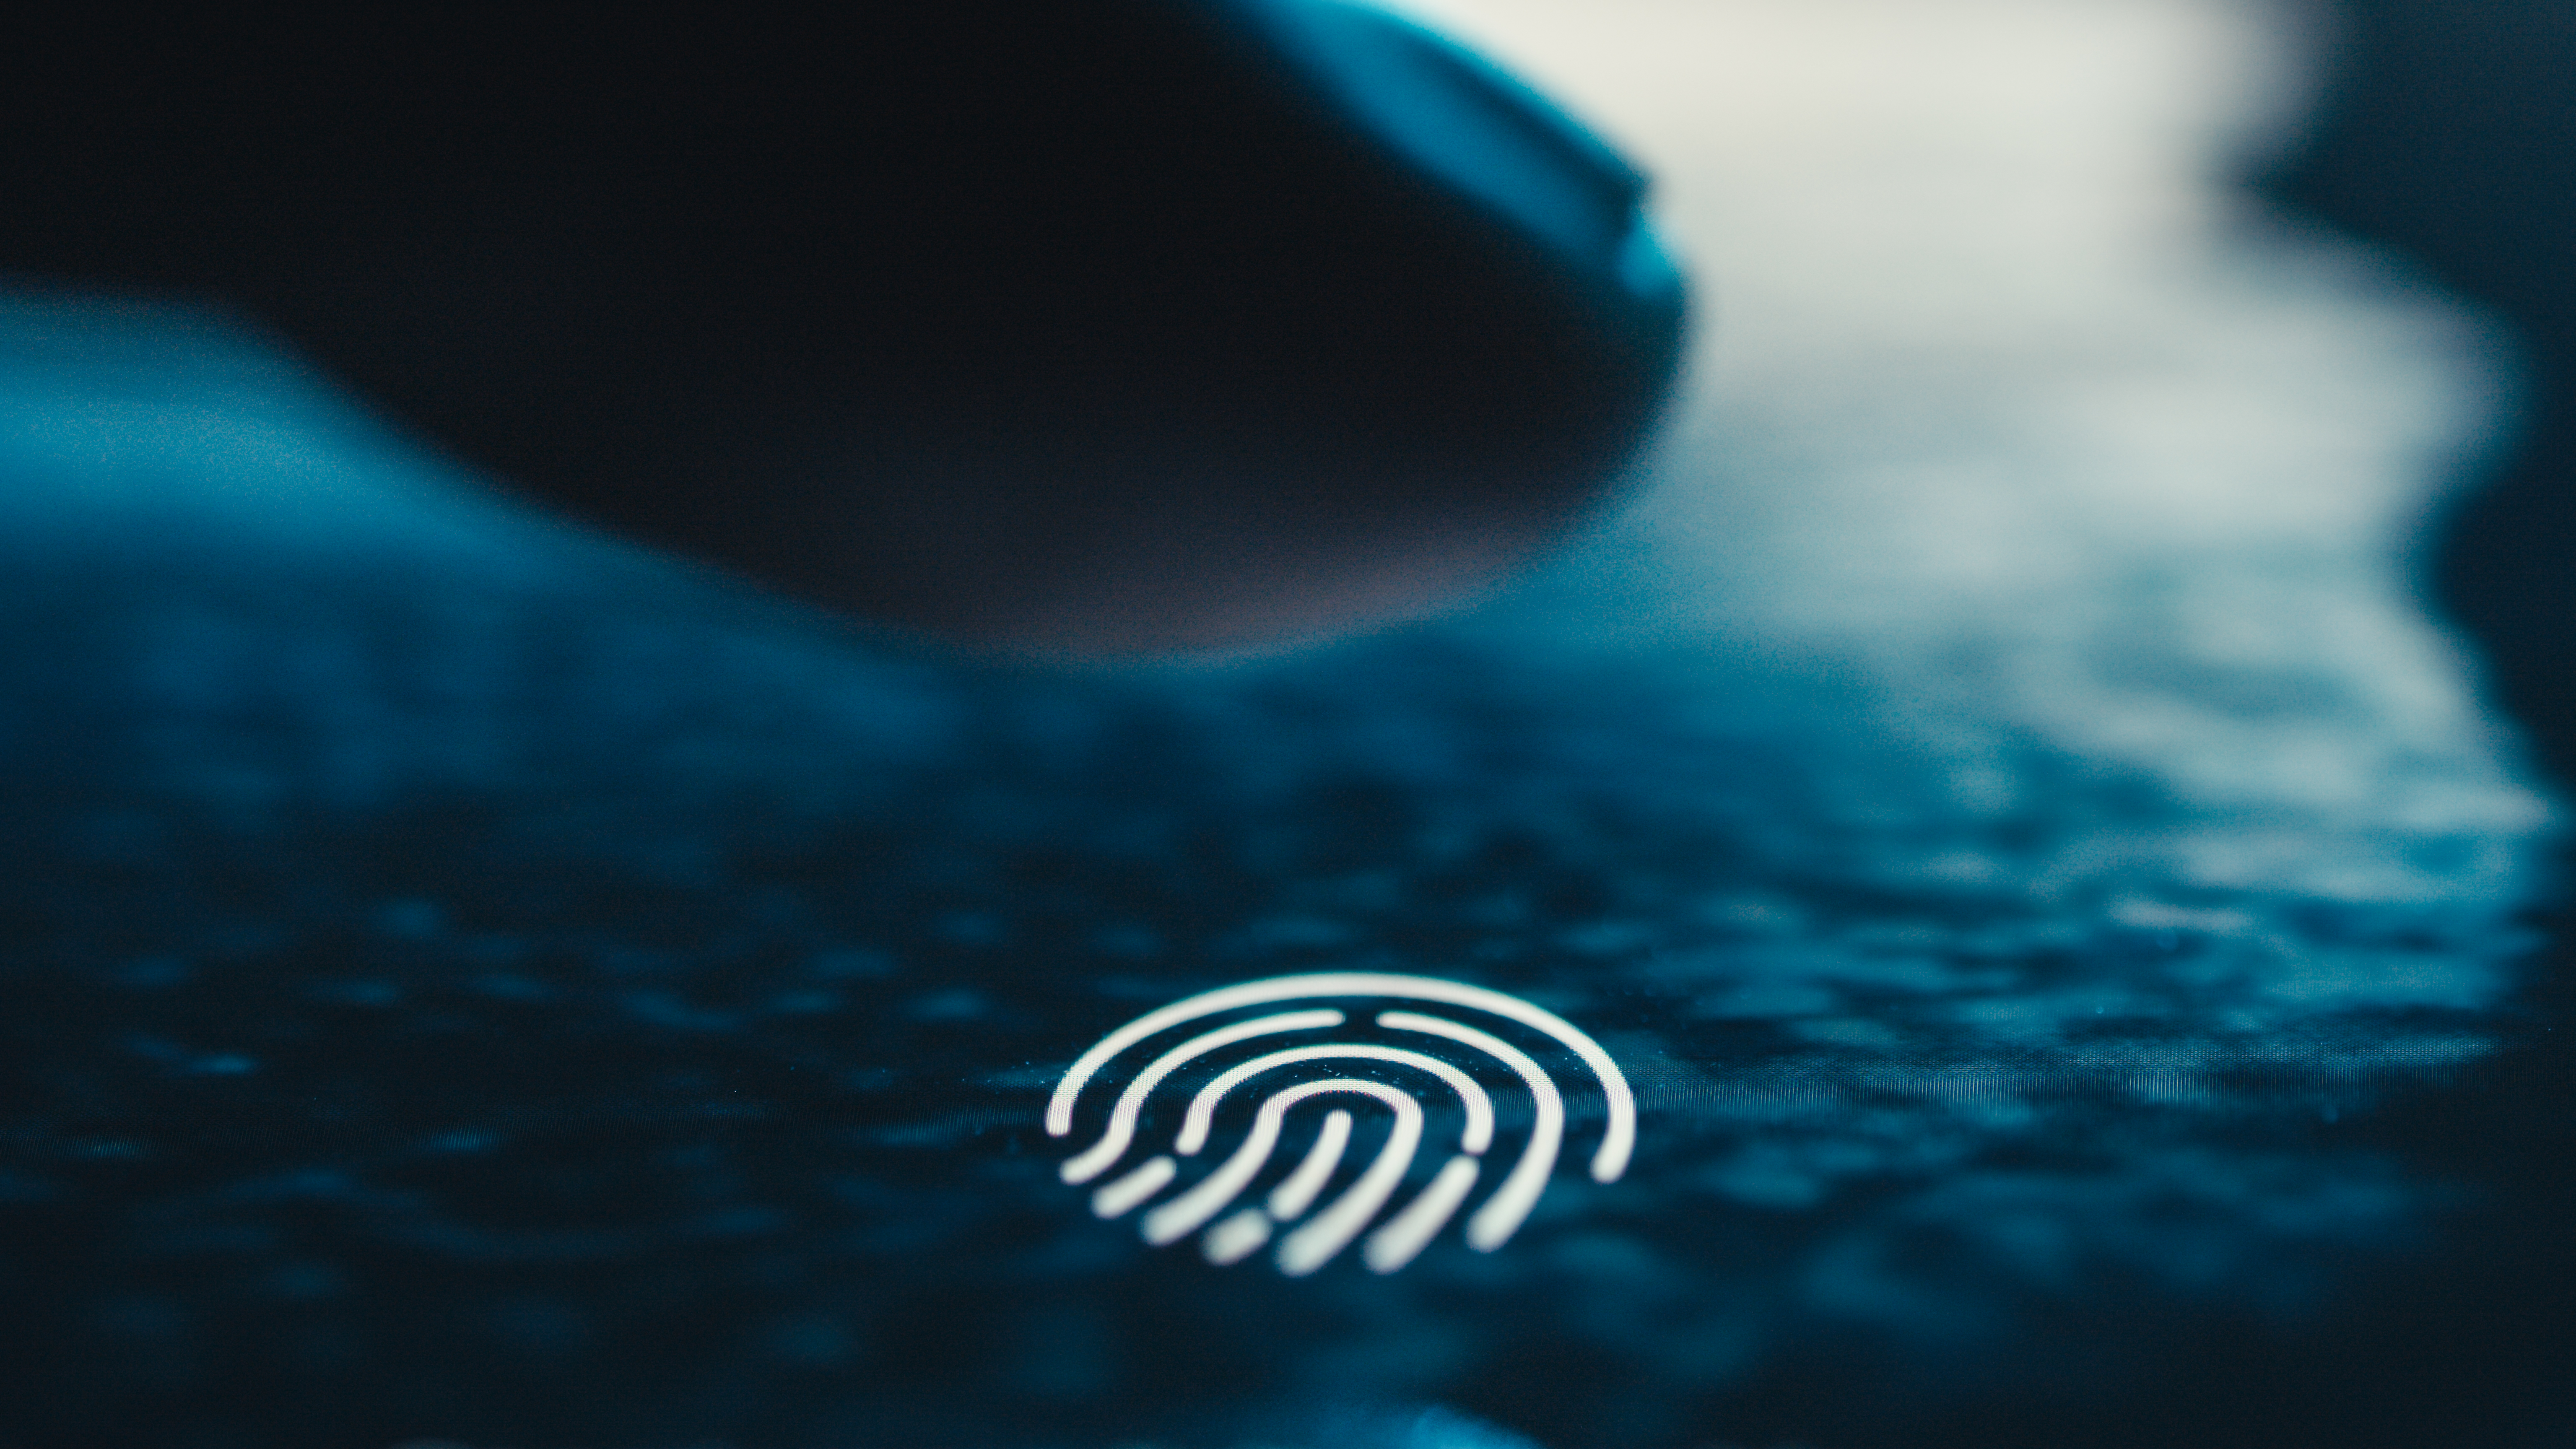 Biometric Authentication in the Middle East: Ensuring Data Security Across All Middle Eastern Countries